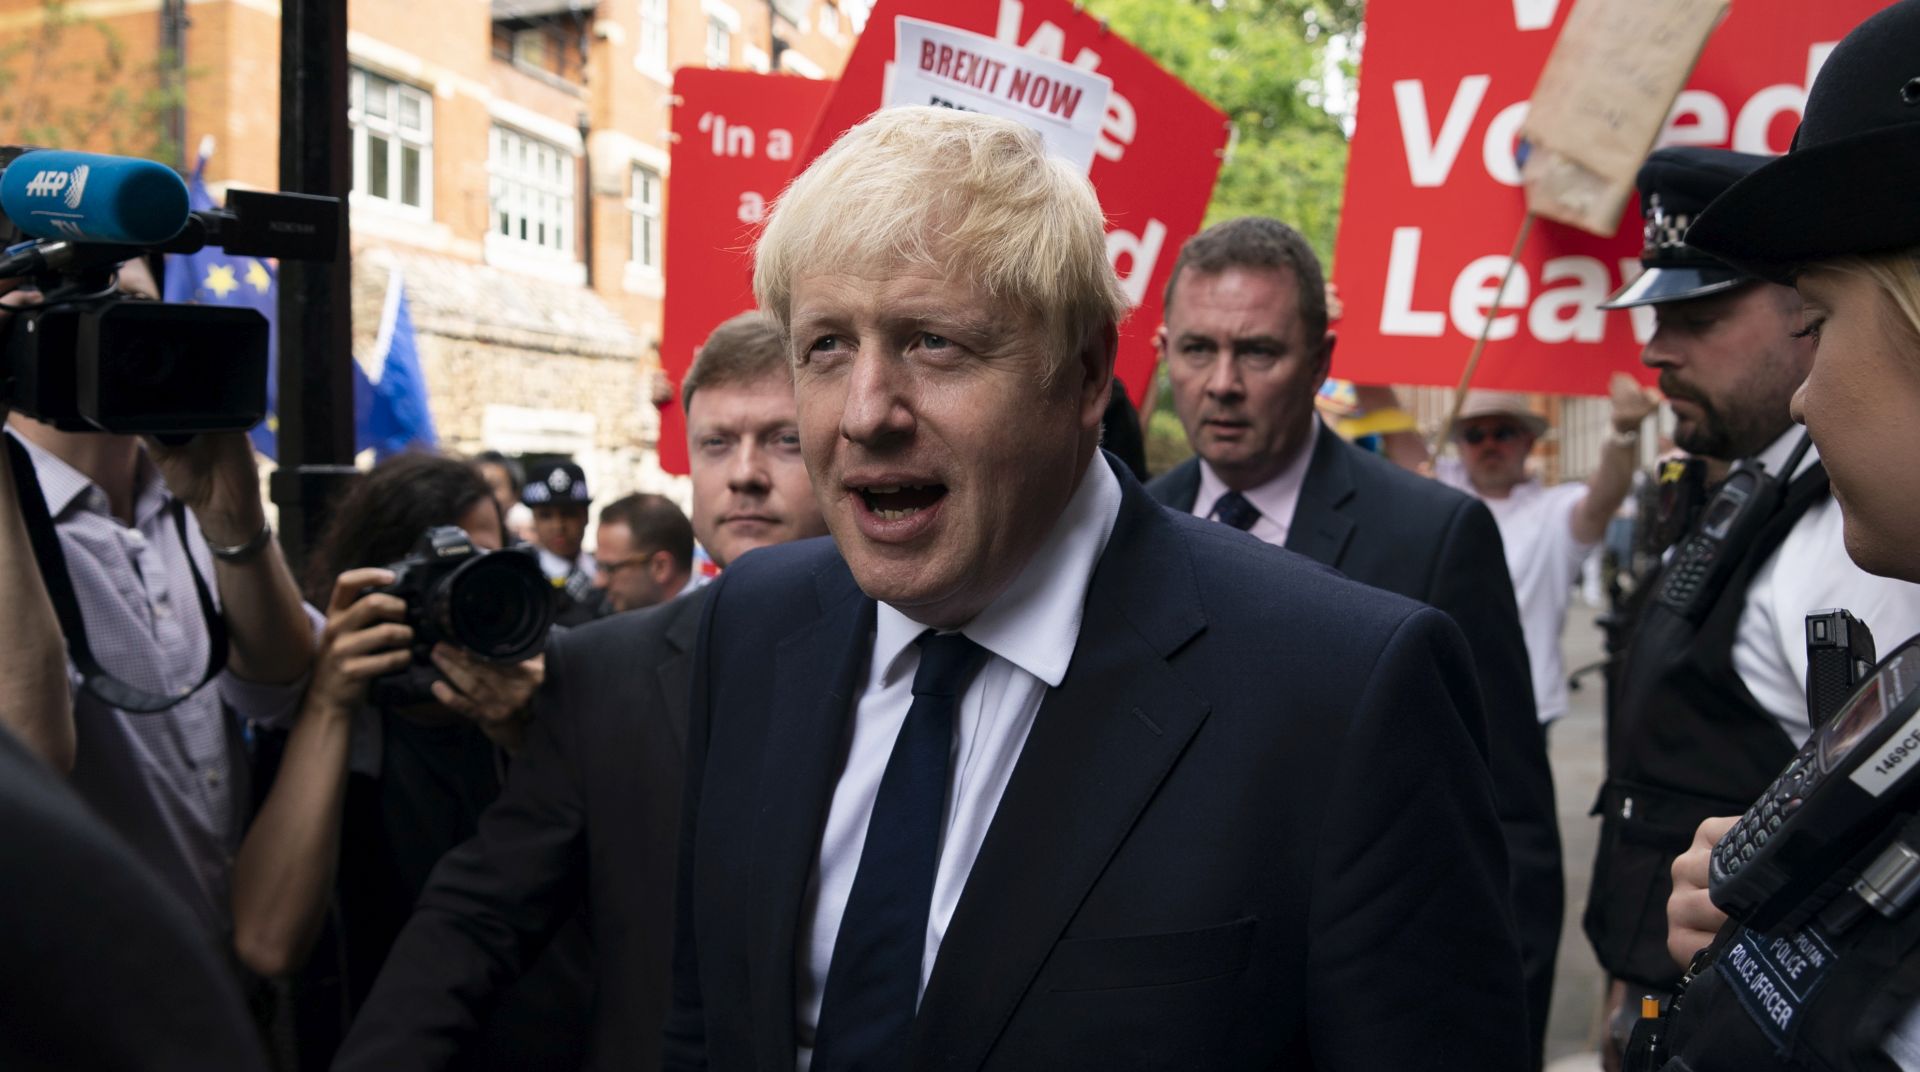 epa07733484 Britain's Former Foreign Secretary Boris Johnson leaves offices in Central London, Britain, 22 July 2019. Johnson and his Conservative Leadership rival Jeremy Hunt will discover who has won the race to become Britain's next prime minister on 23 July 2019.  EPA/WILL OLIVER